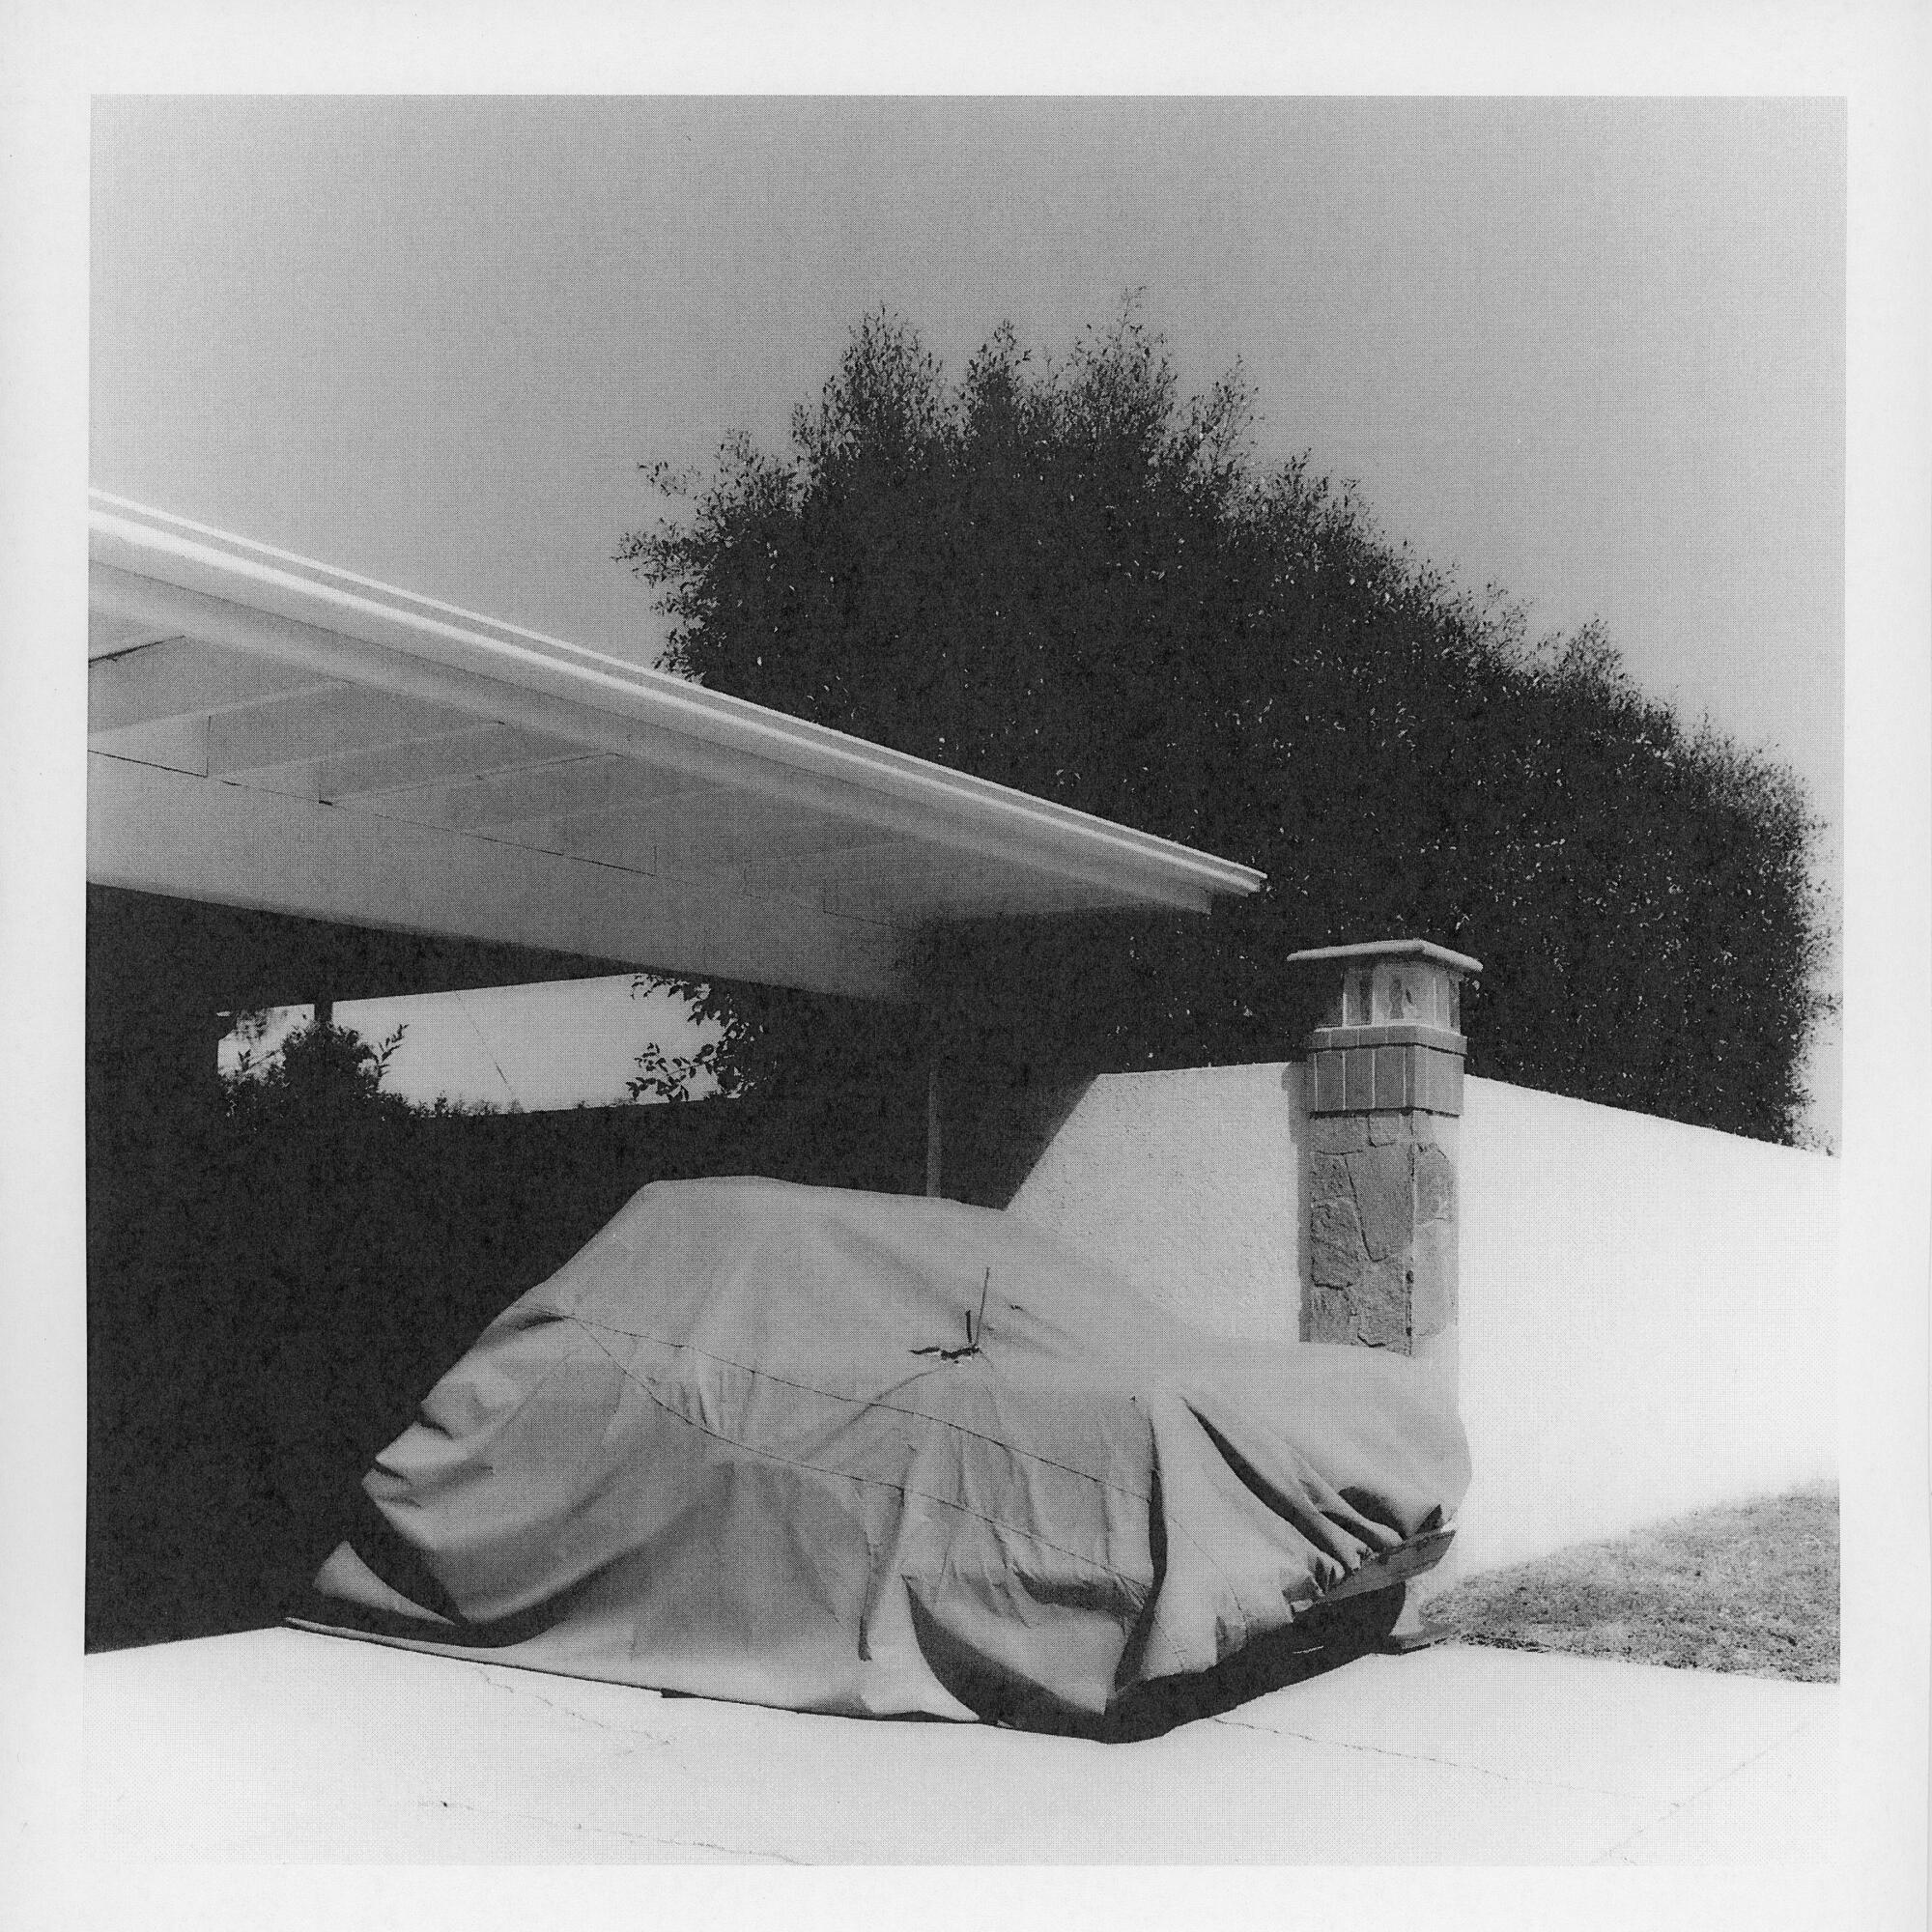 A black-and-white photo of a car parked under an awning.